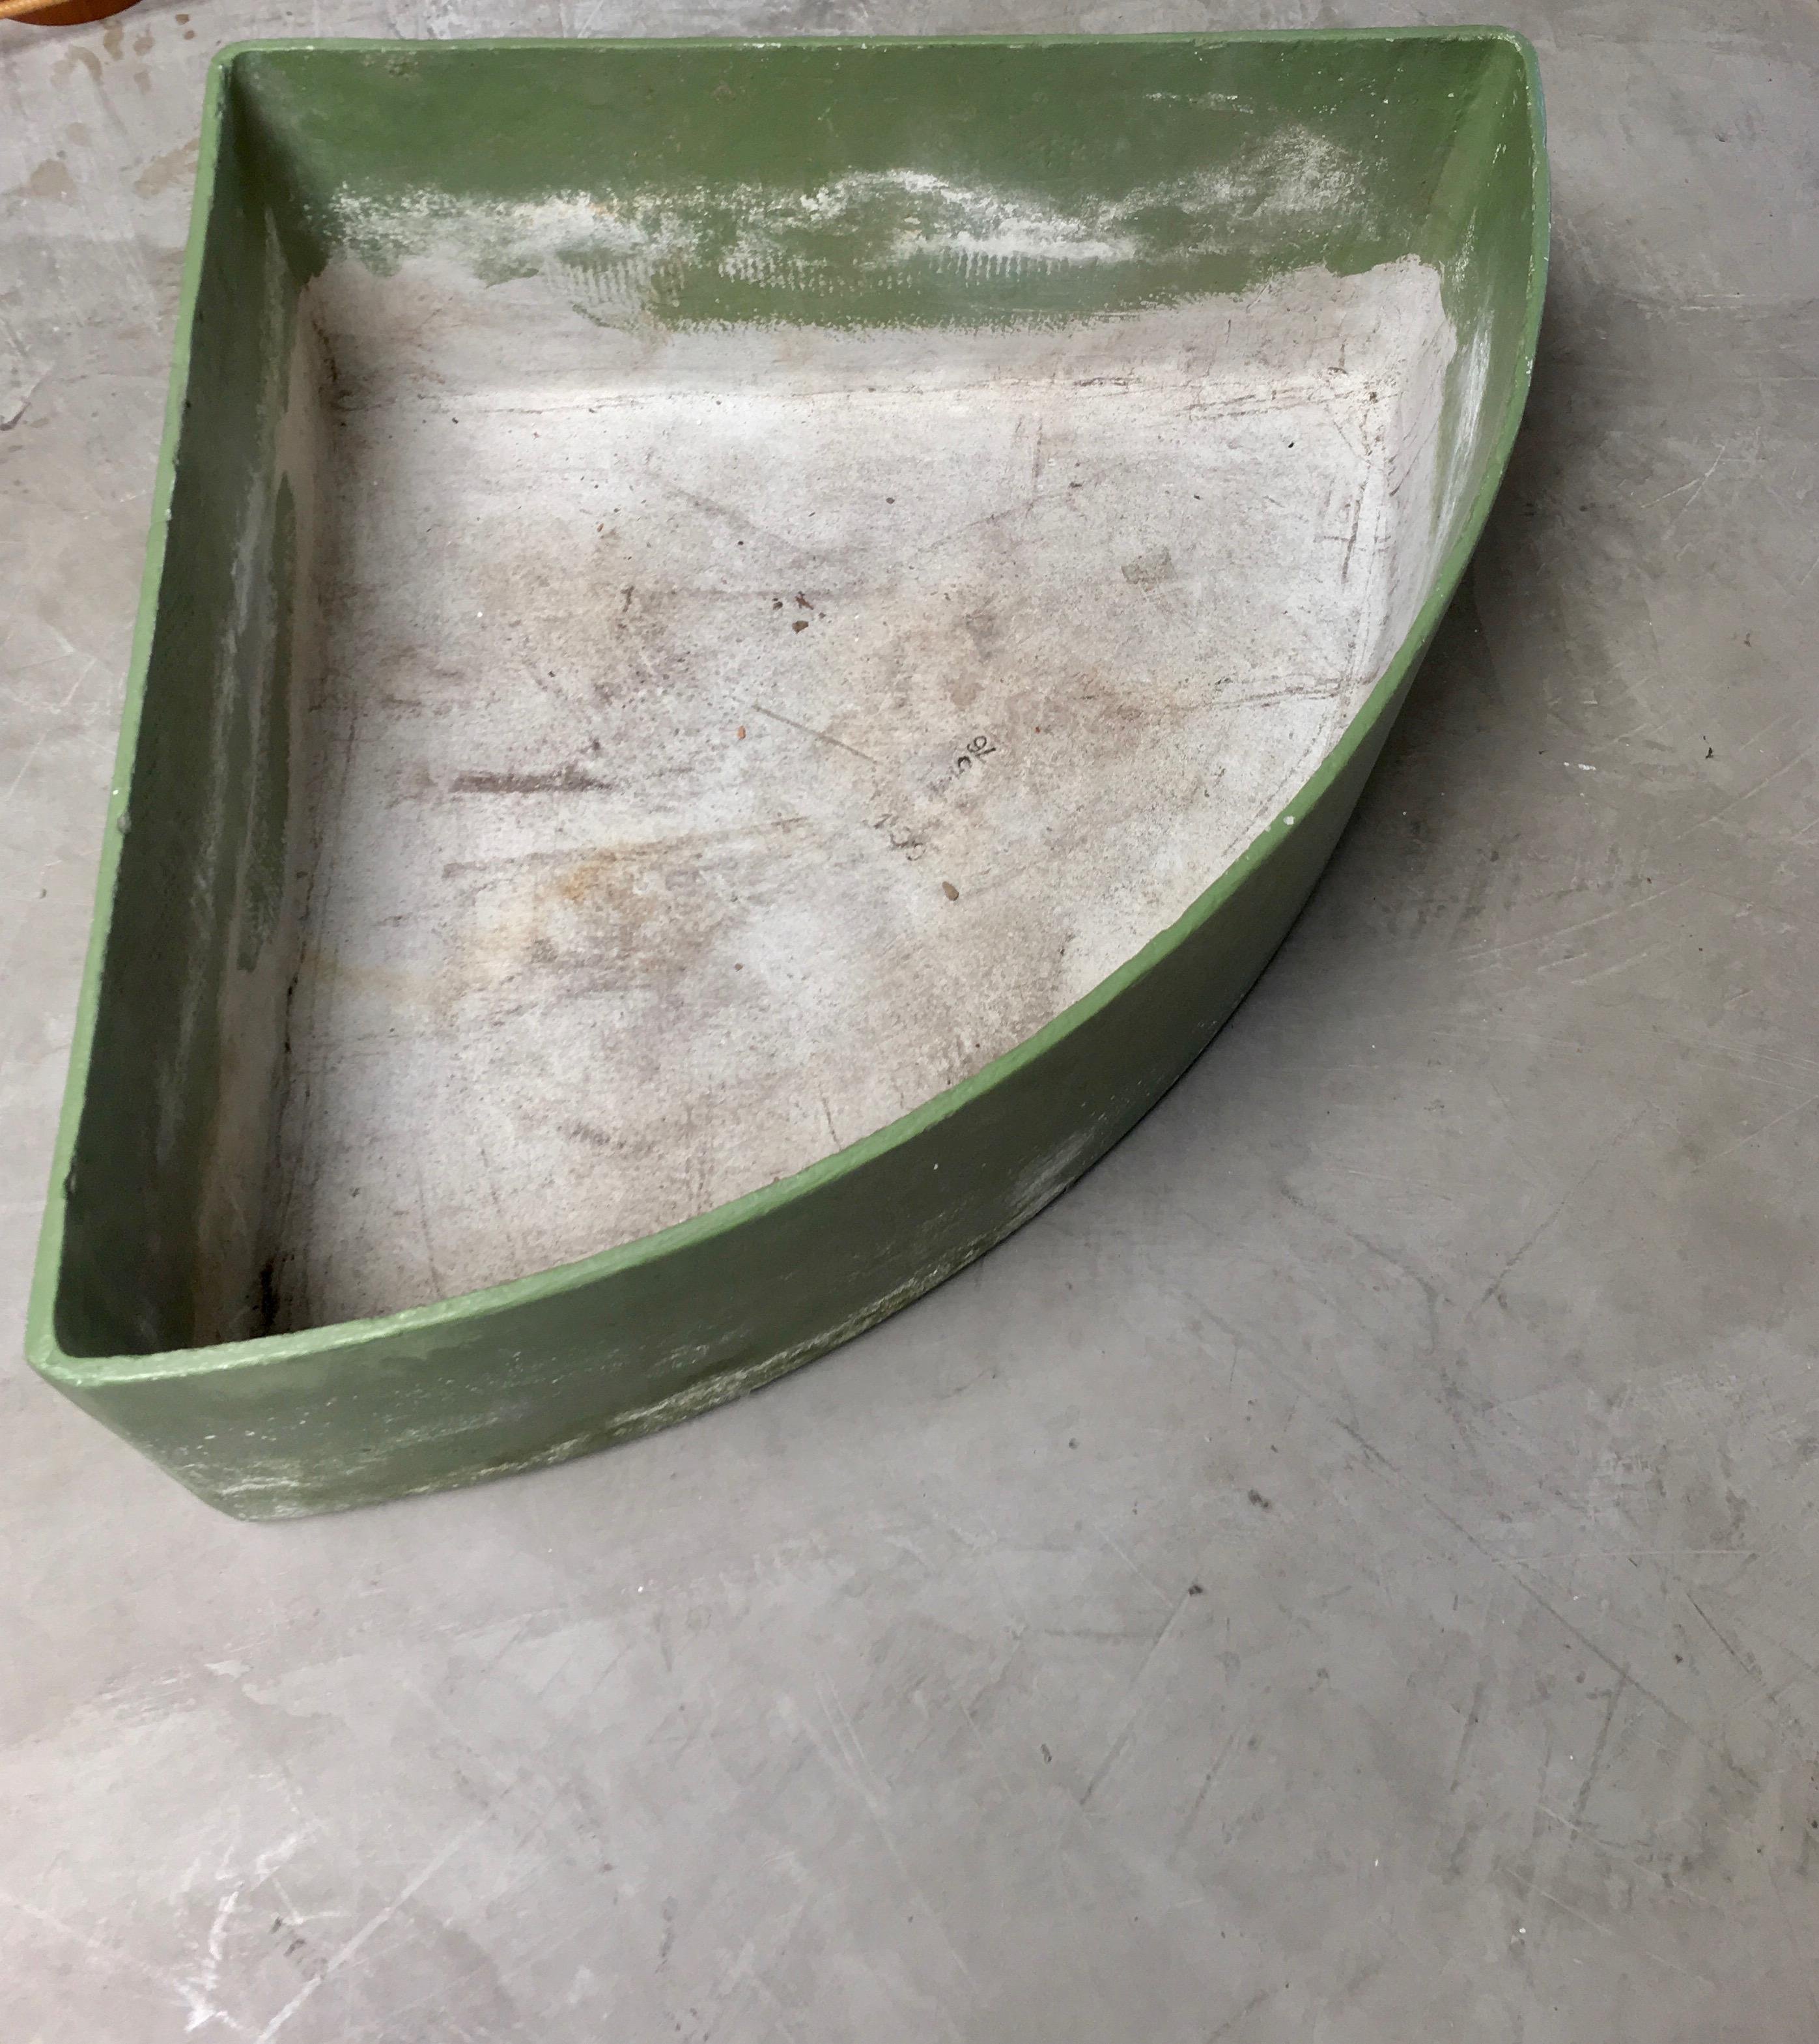 Massive green corner planter by Swiss Architect Willy Guhl. Gorgeous planter for indoors or outside. Excellent patina. Never seen this piece before. Large scale. Great green and white coloring. Stamped item numbers from factory. Excellent